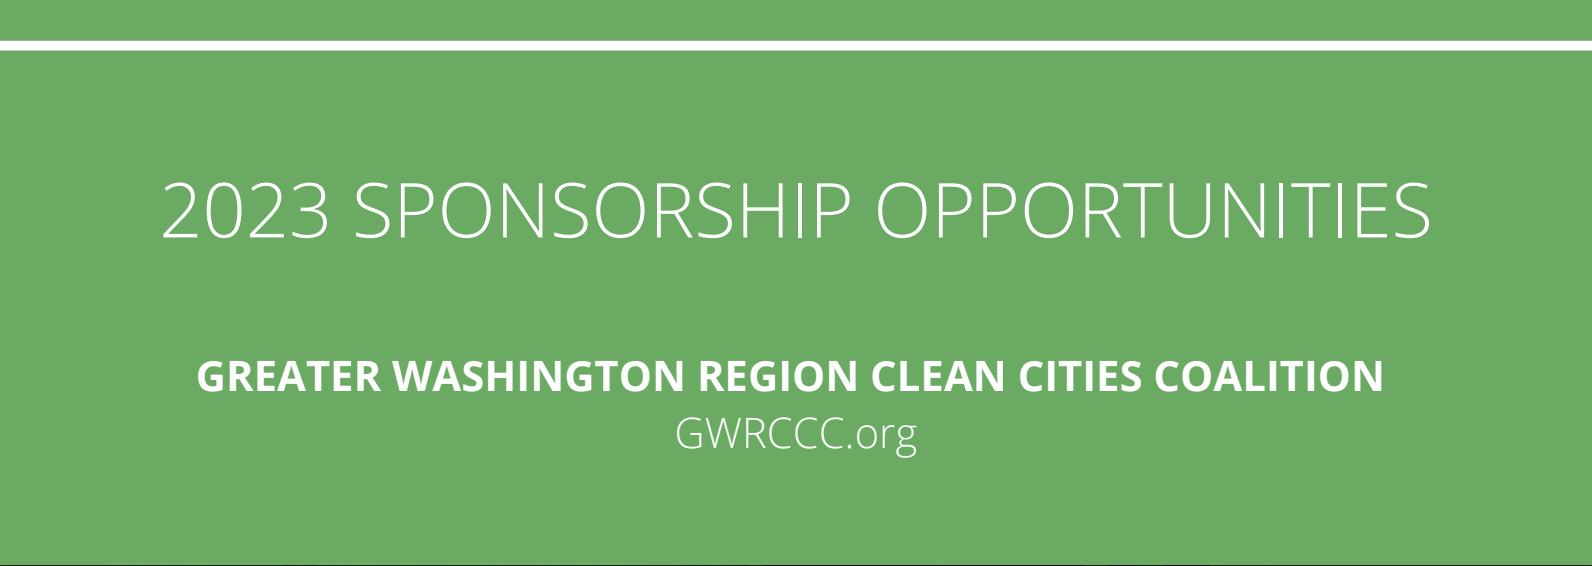 2023 Sponsorship Opportunities Greater Washington Region Clean Cities Coalition GWRCCC.org